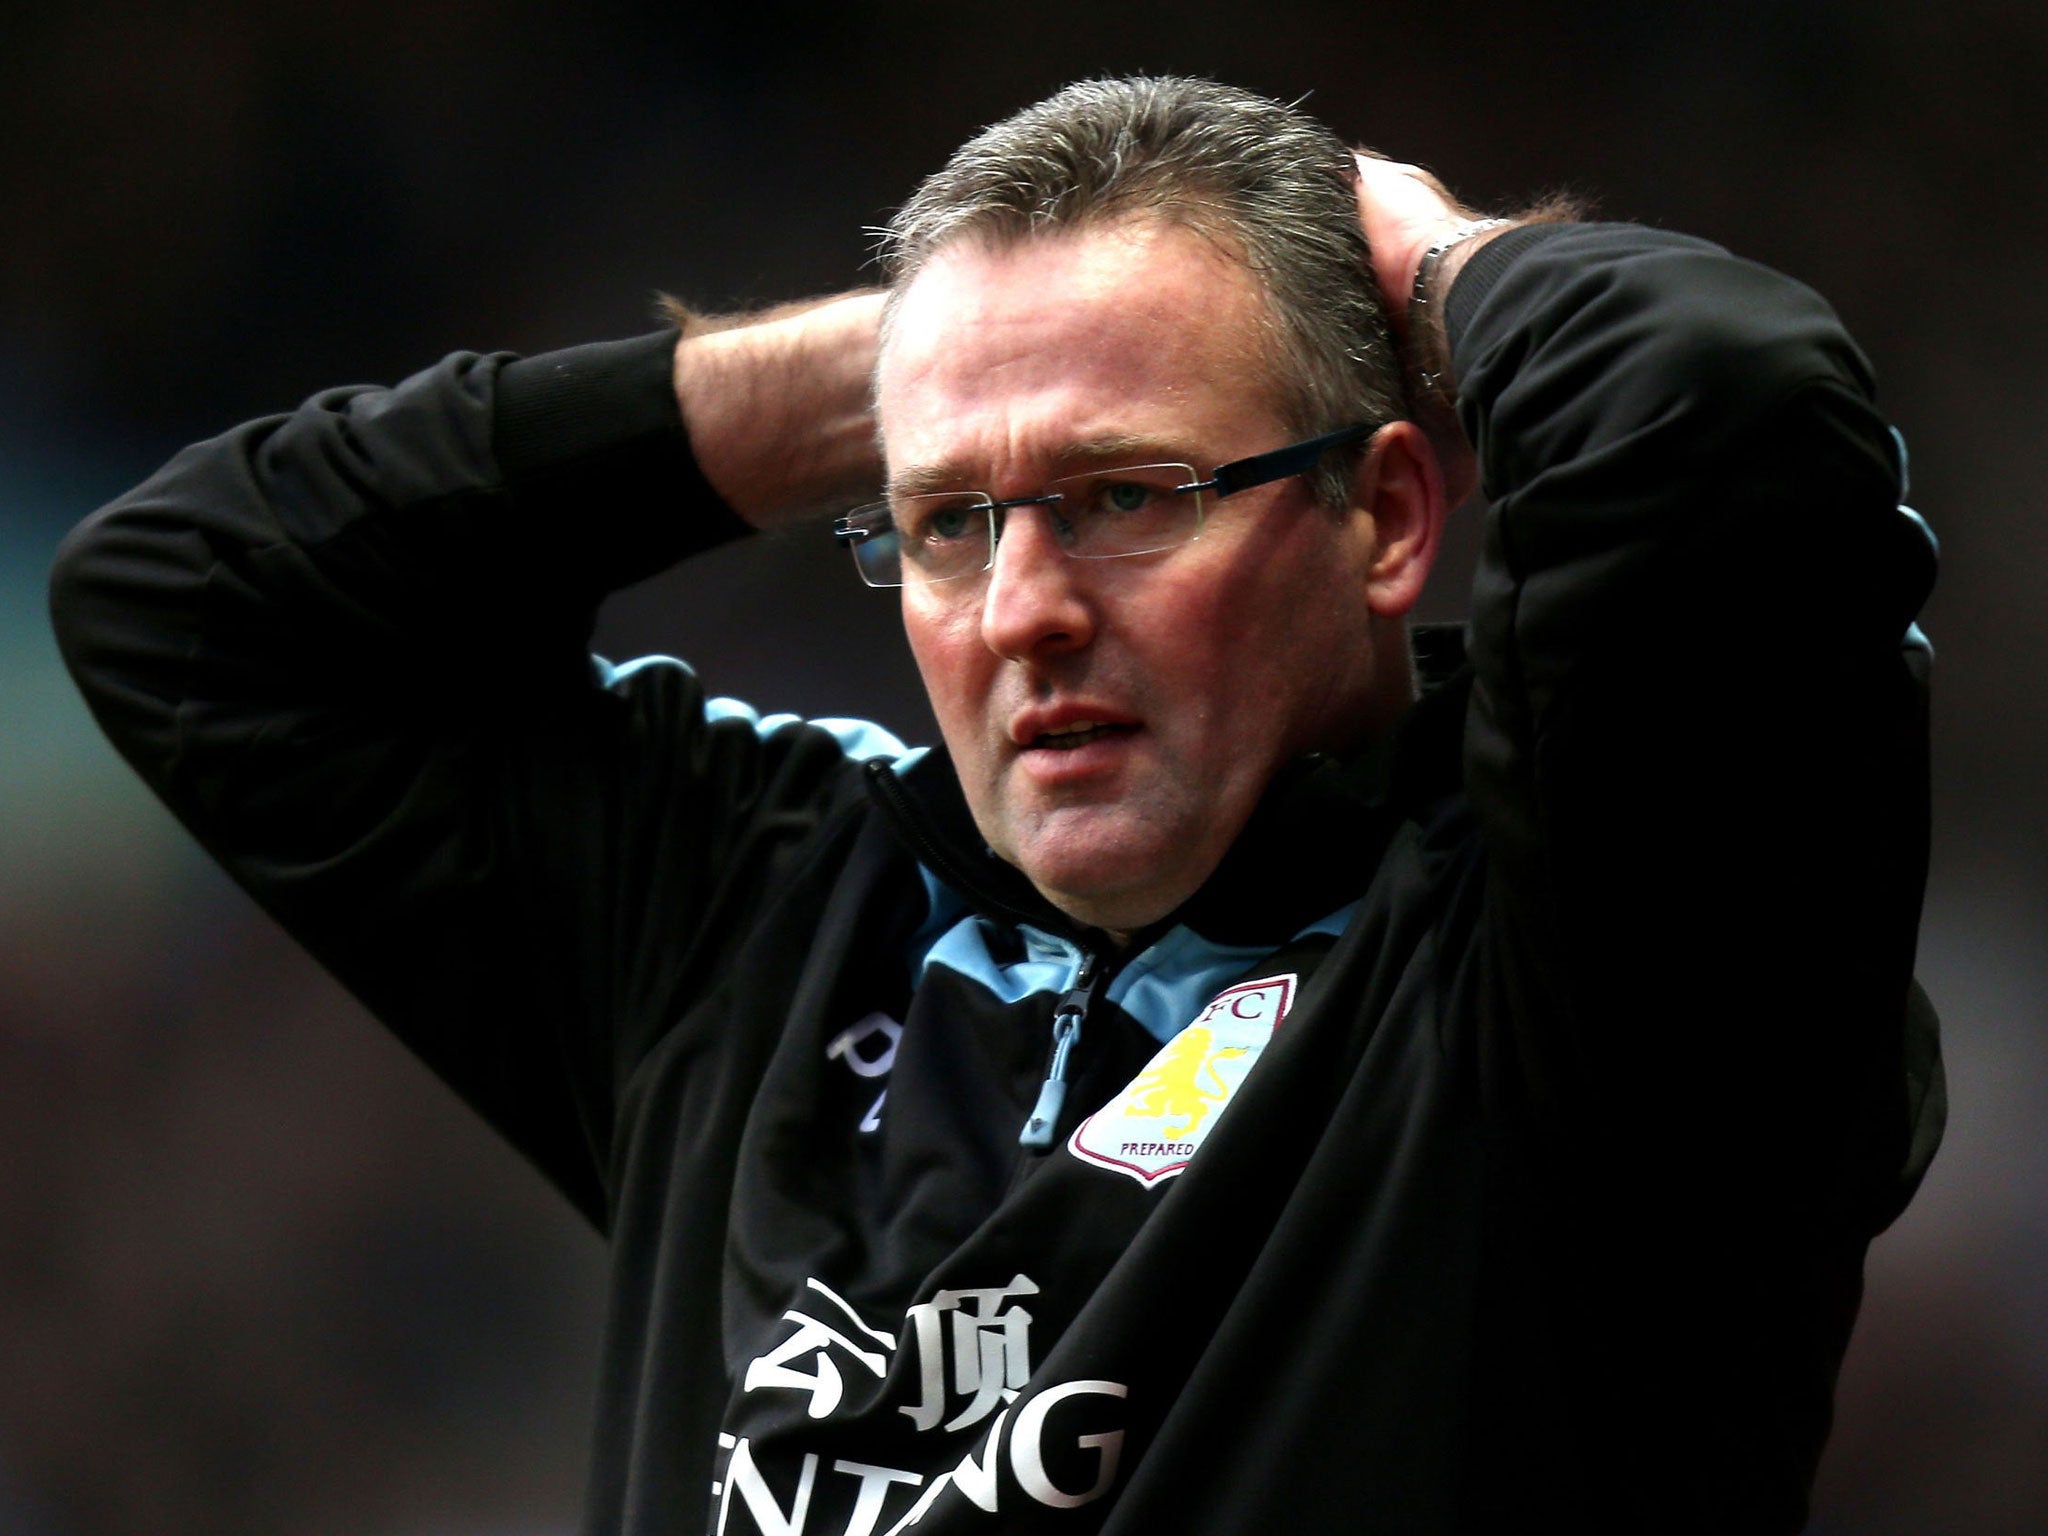 Paul Lambert said: “I trust Randy [Lerner]. That’s the kind of relationship I have with him. I spoke with him after the game the other night and we have a good conversation every time.'